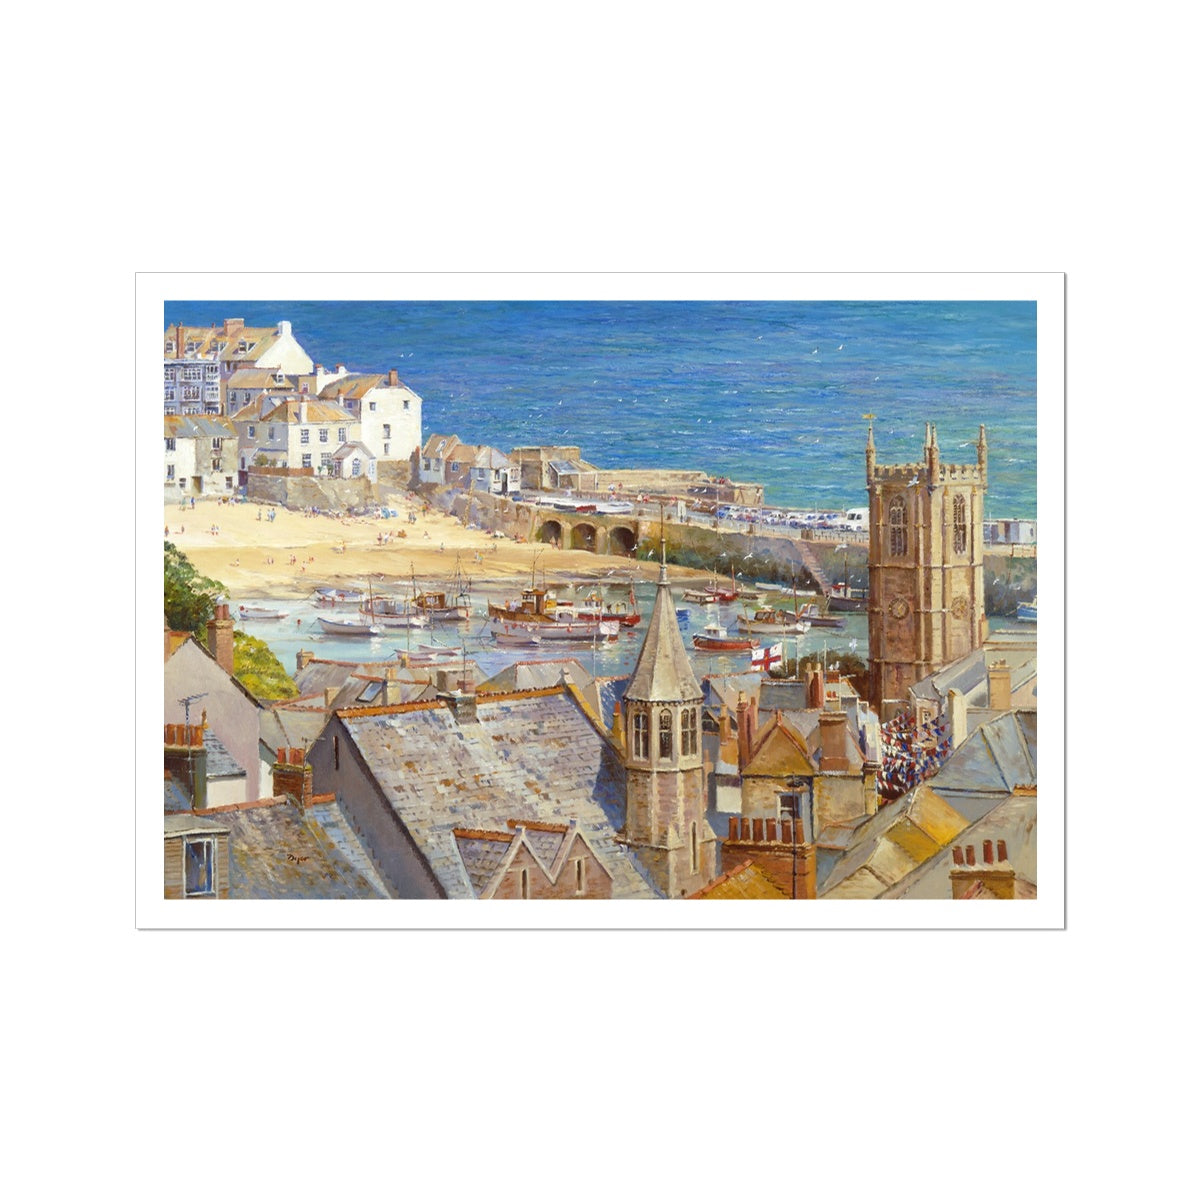 Ted Dyer Fine Art Print. Open Edition Cornish Art Print. 'The Royal Visit, St Ives'. Cornwall Art Gallery